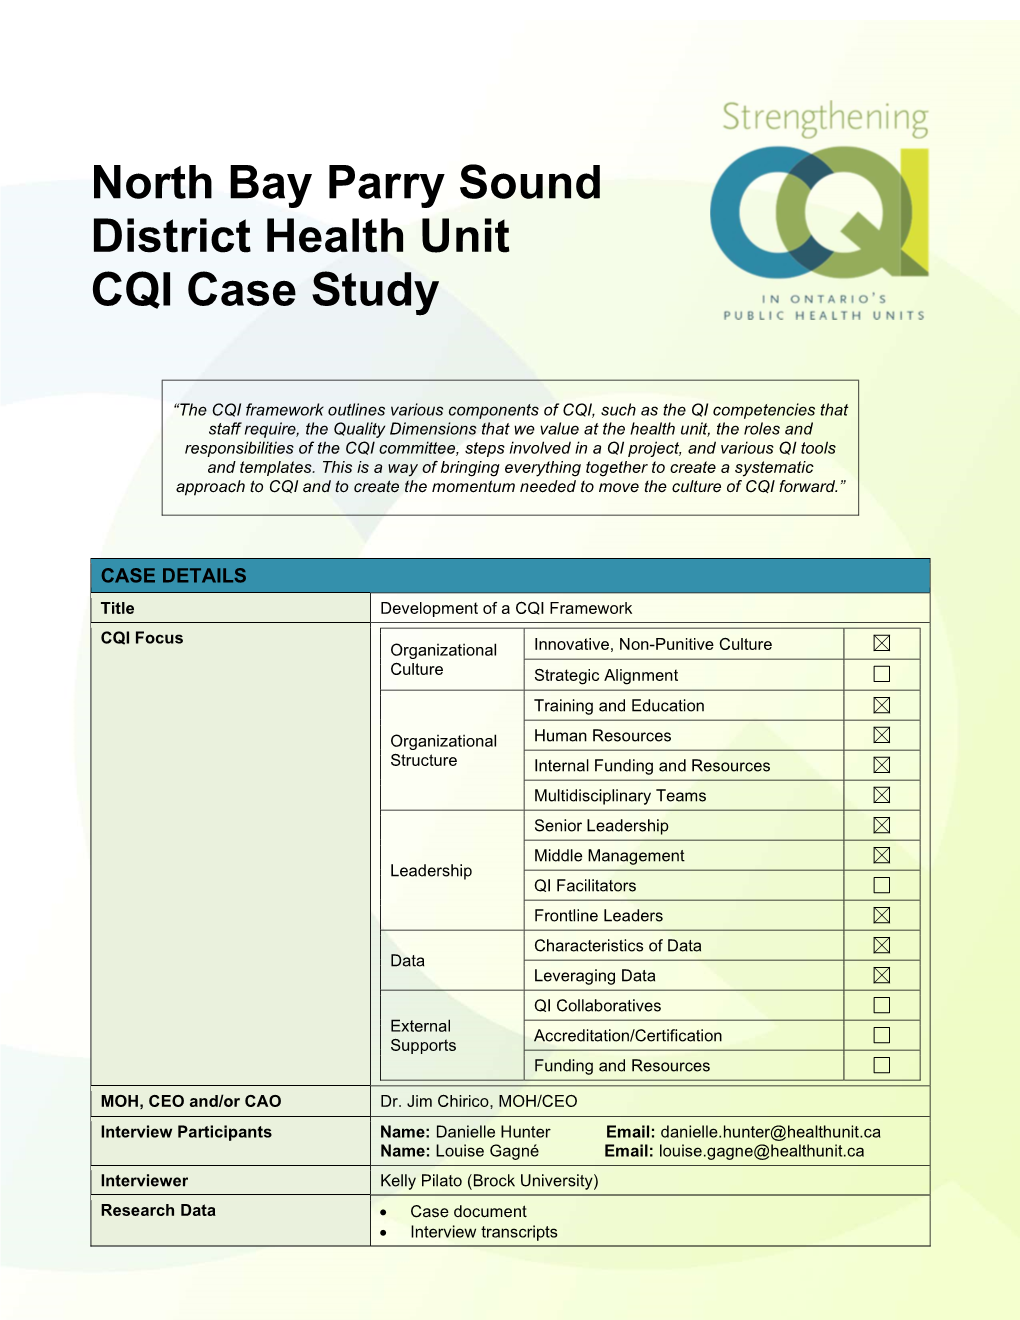 North Bay Parry Sound District Health Unit (NBPSDHU) Did Not Have an Organizational Strategy Or Framework for Continuous Quality Improvement (CQI)